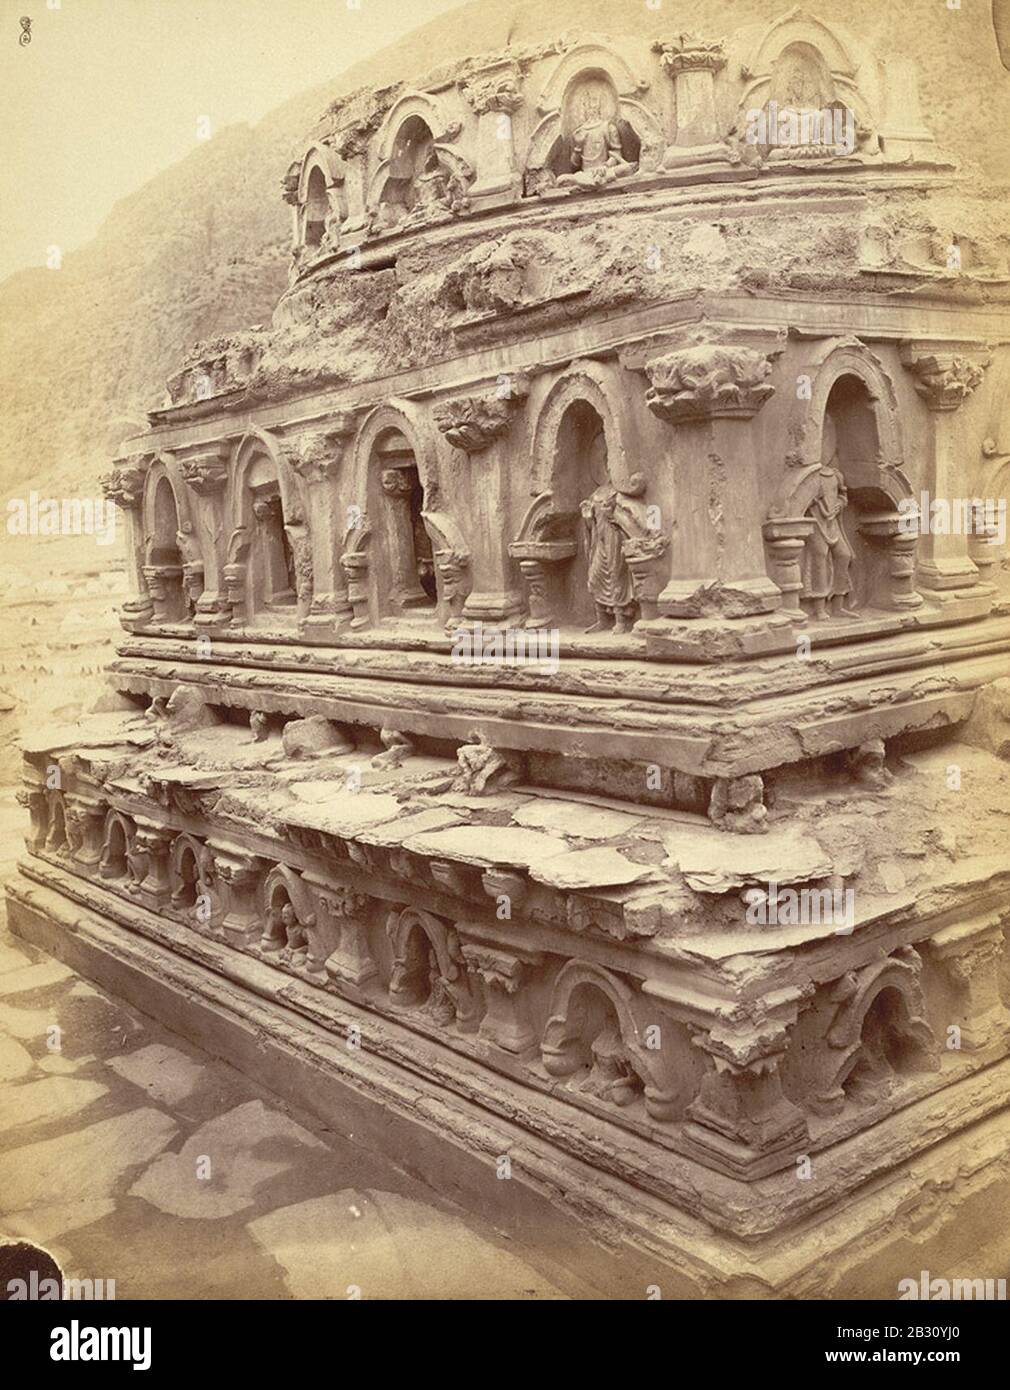 General view of Stupa No. 6, with Buddha images in niches, Ali Masjid ...